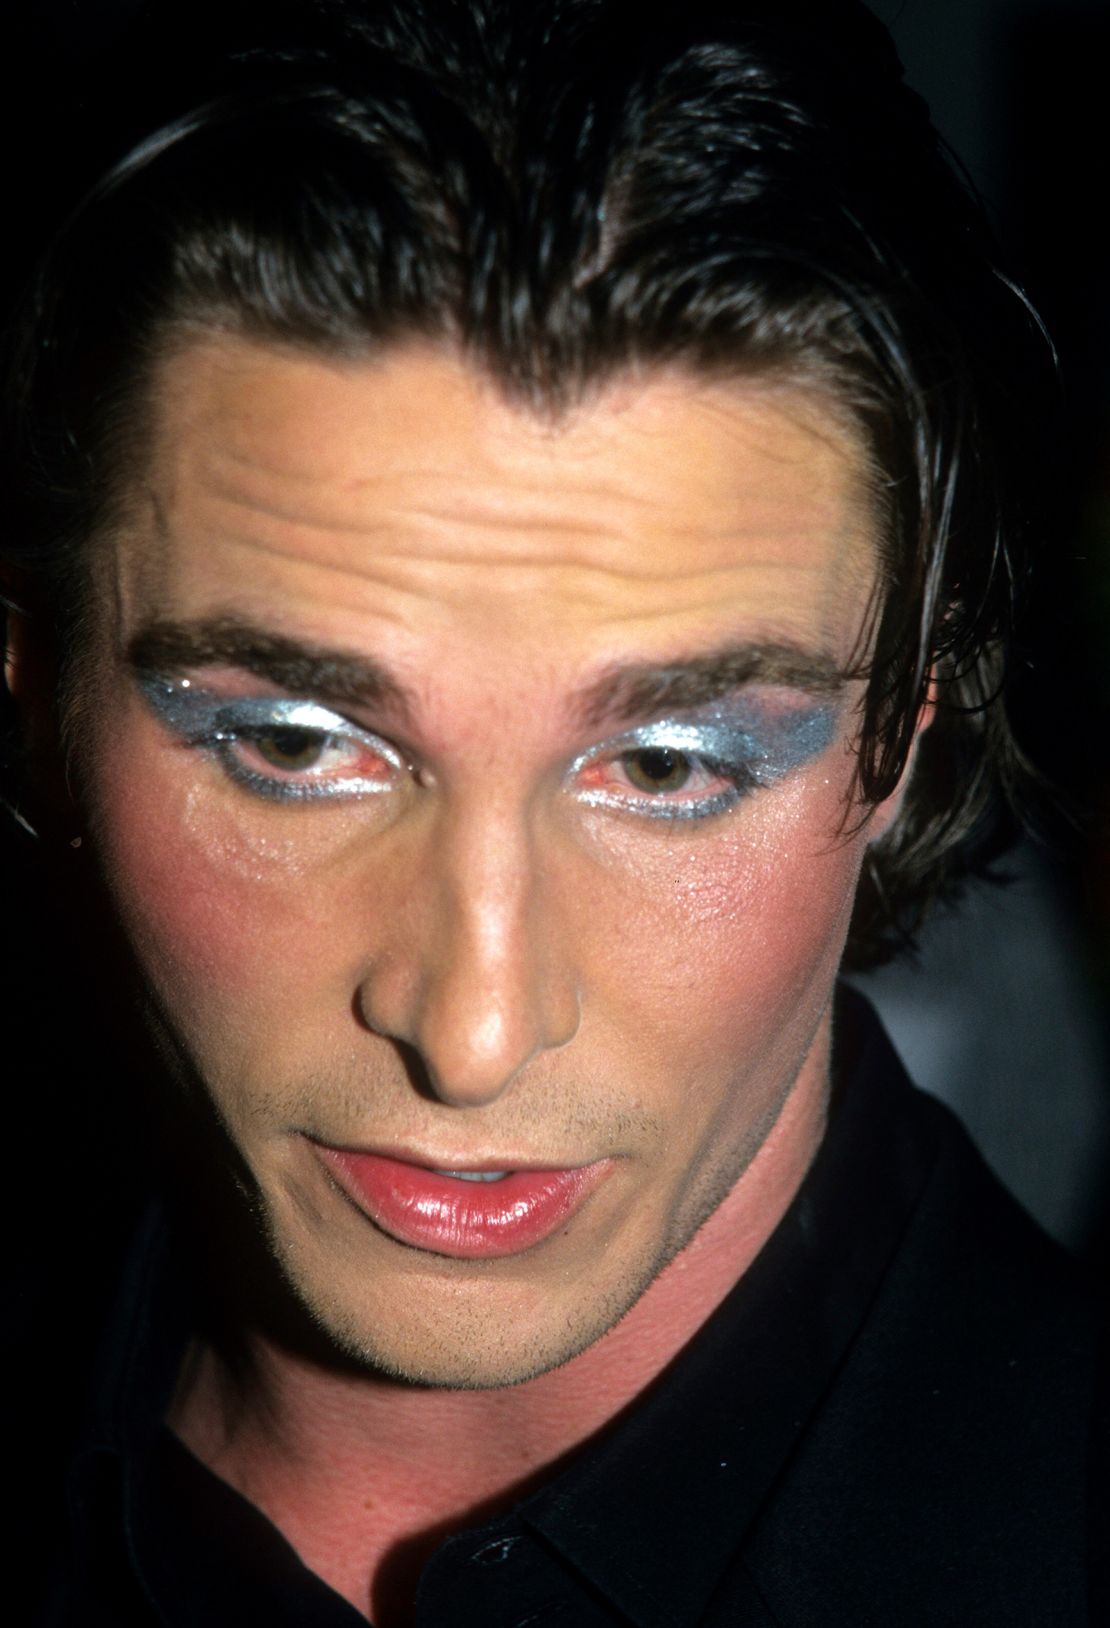 The silver make up was tied to the glam rock movie "Velvet Goldmine," premiering in New York.